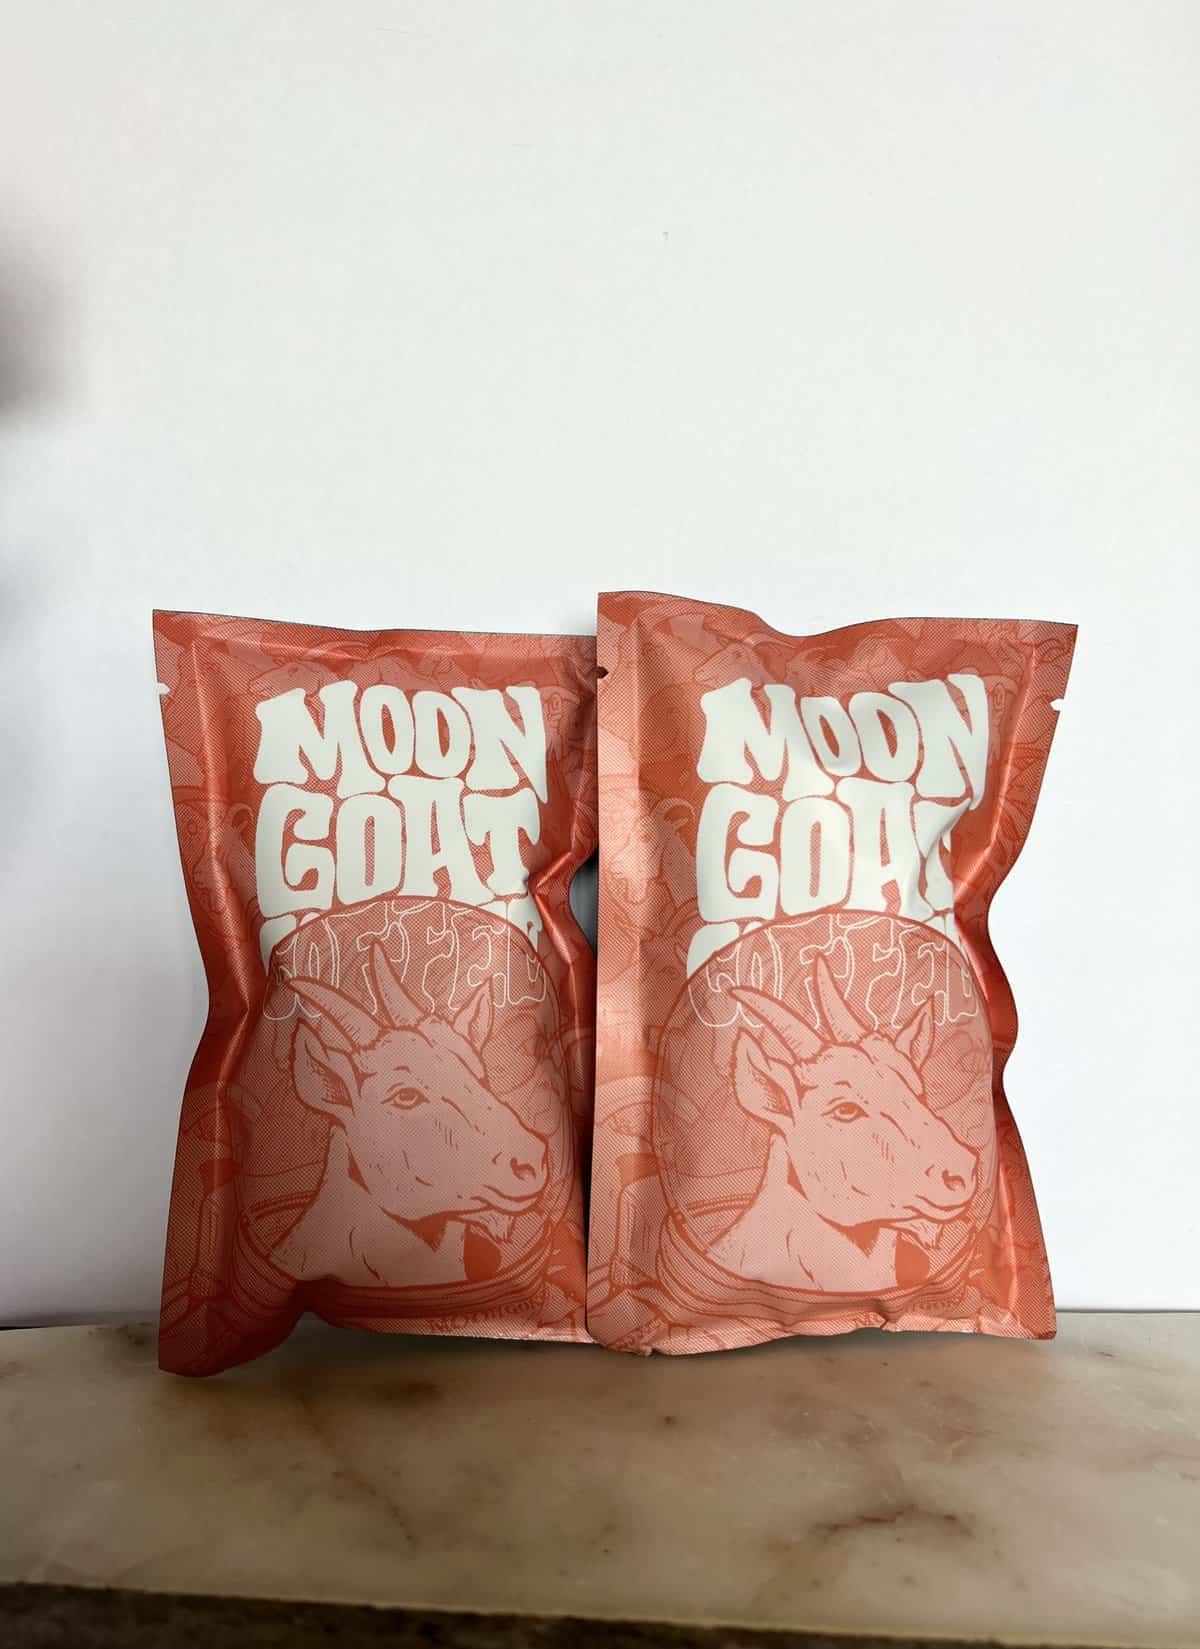 moongoat-coffee-red-scaled